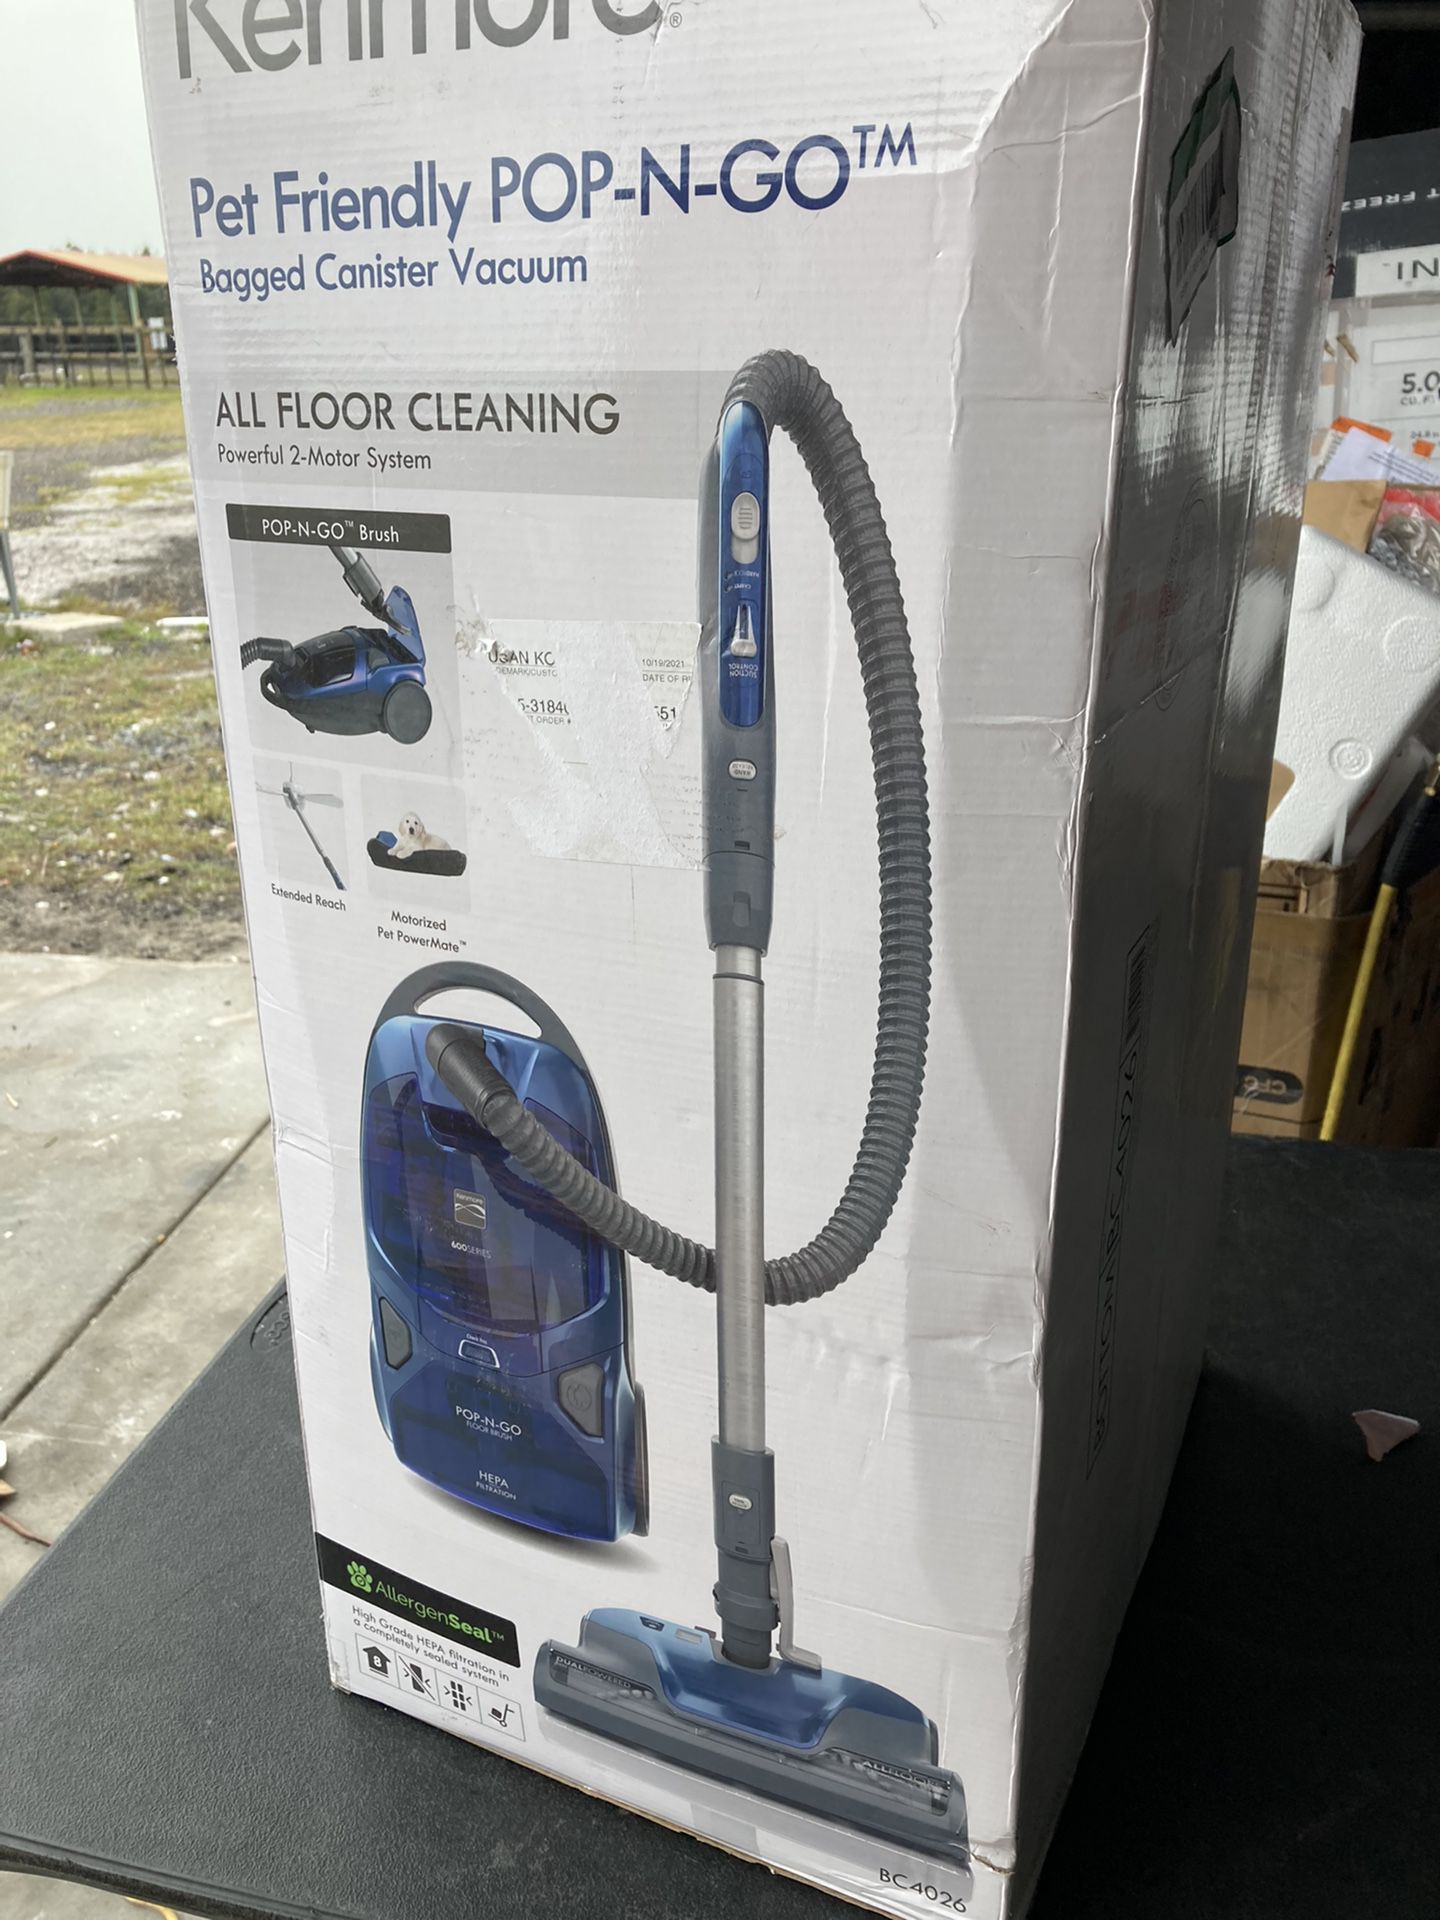 kenmore per friendly por-n-go bagged canister vaccum all floor cleaning